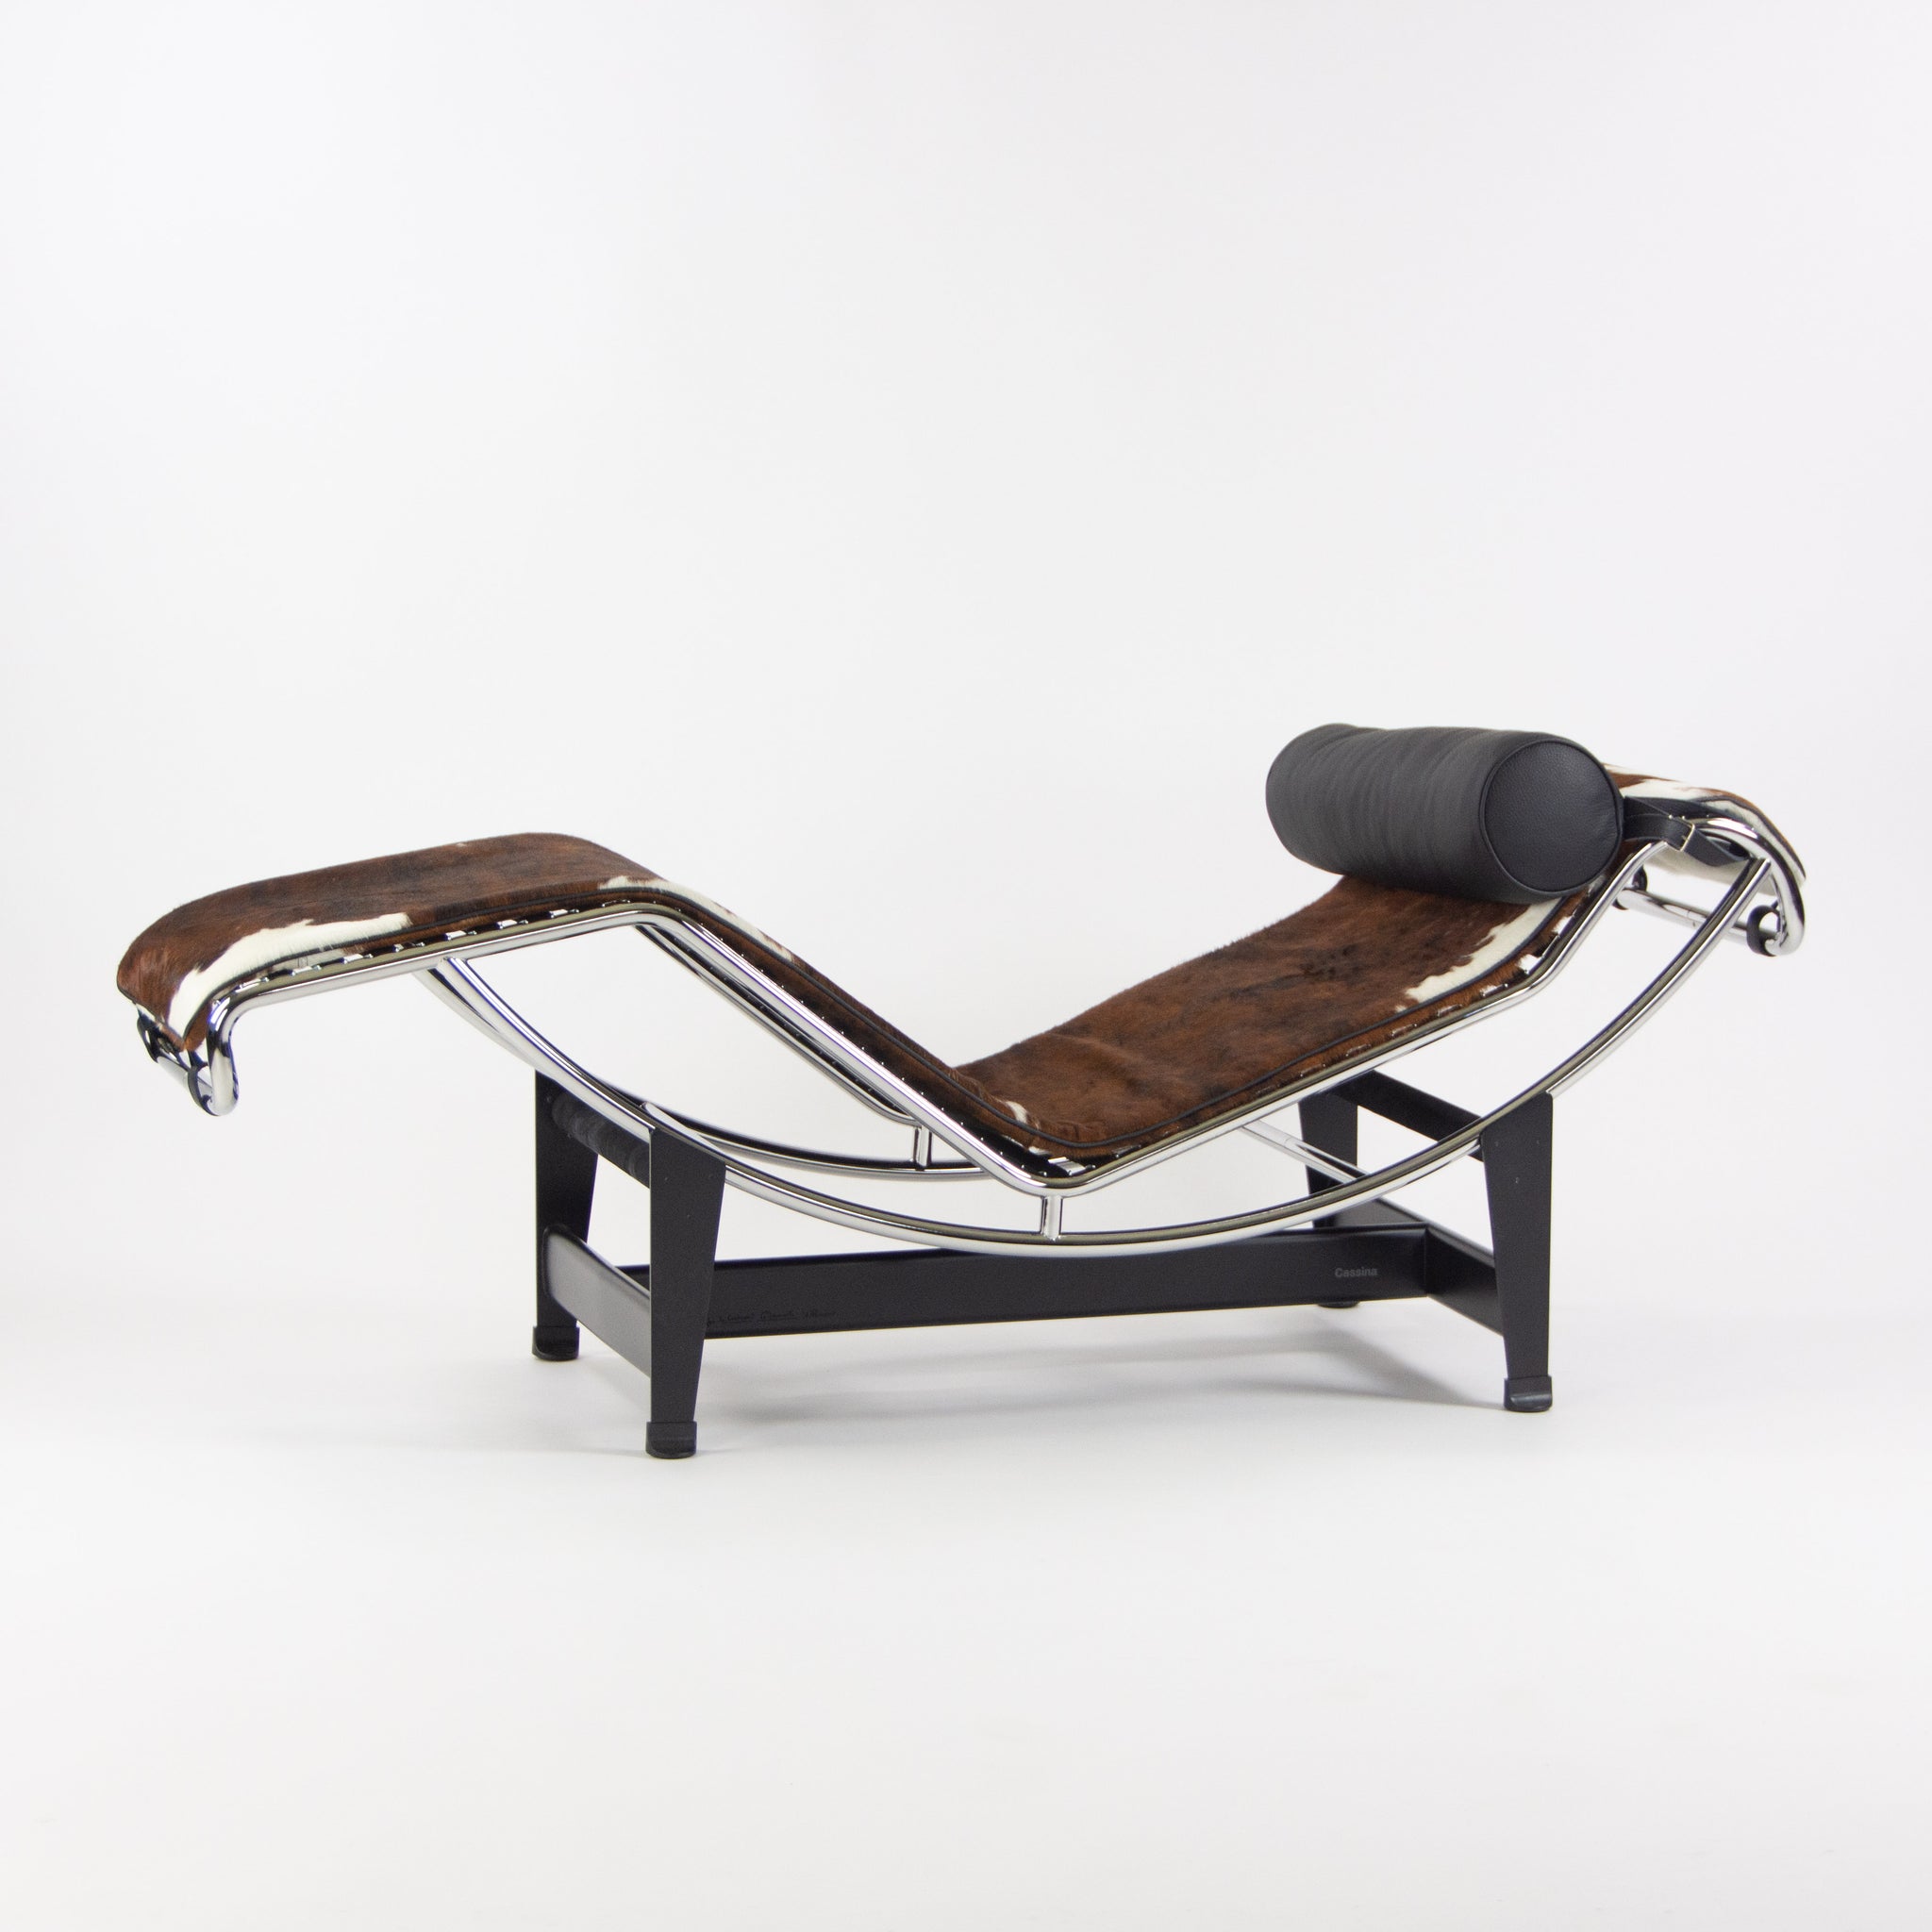 Lc4 Le Corbusier Noire Brown Leather Chaise Lounge for Cassina